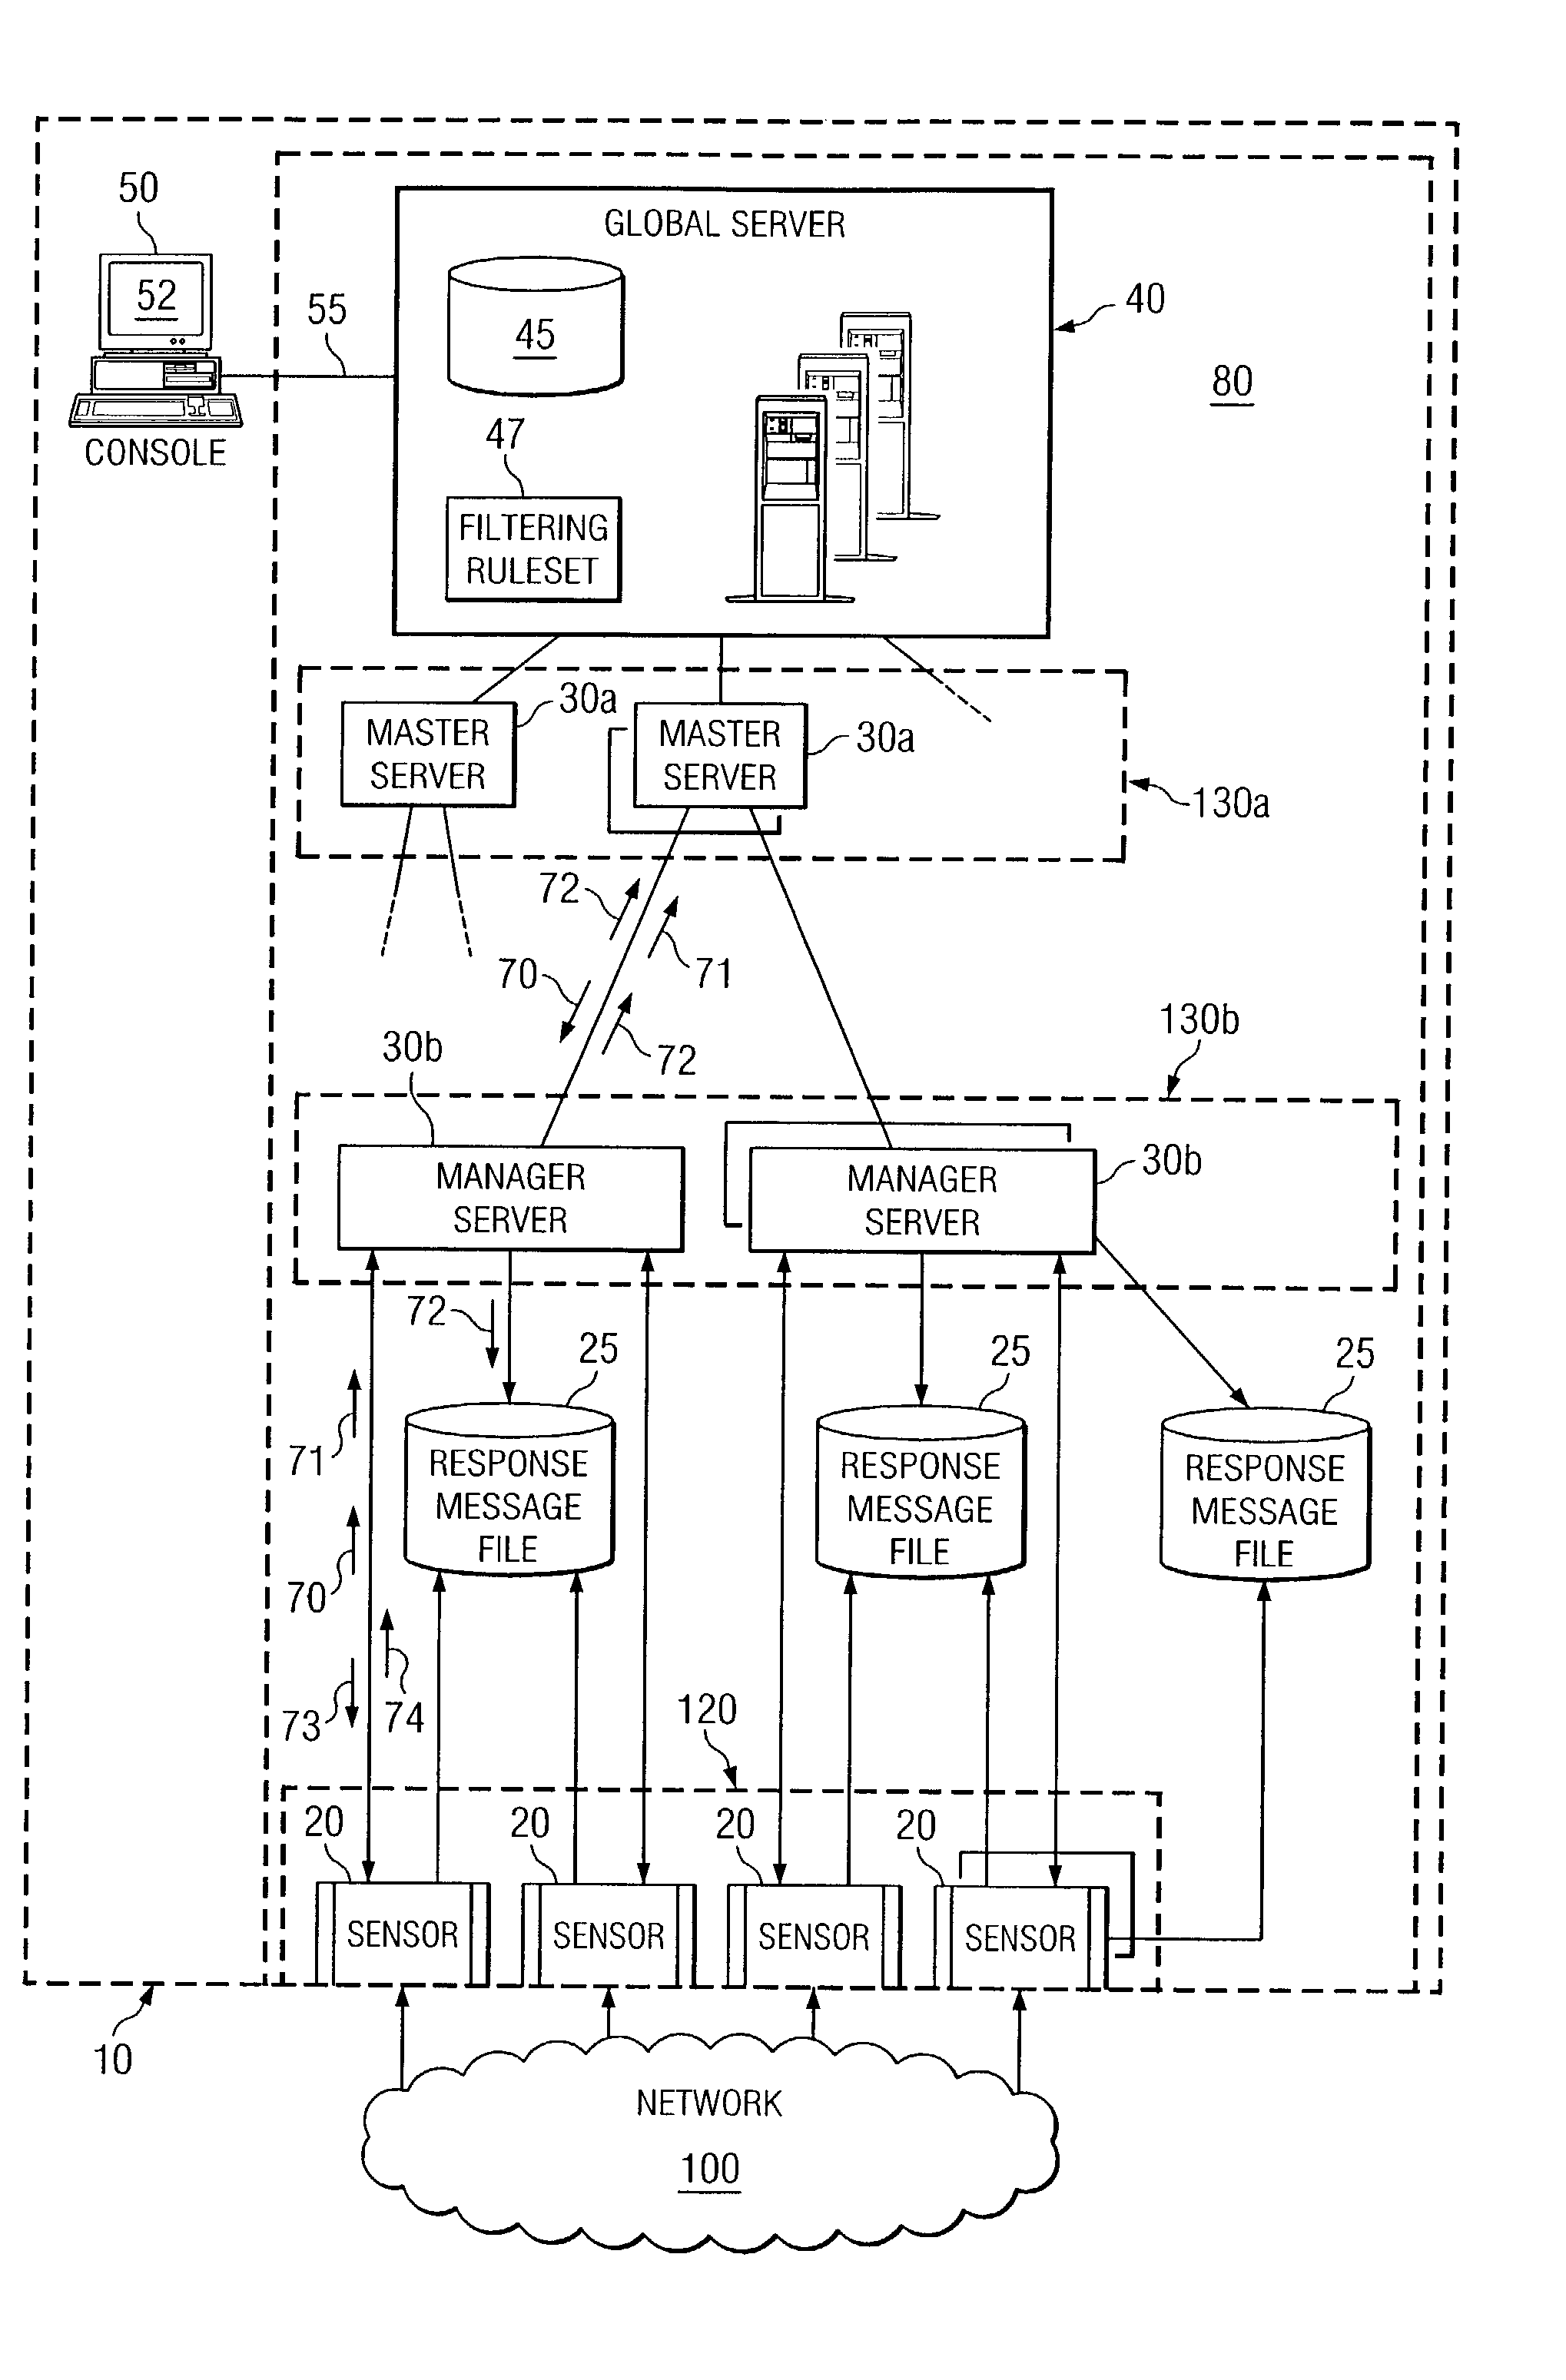 Dynamic rule generation for an enterprise intrusion detection system